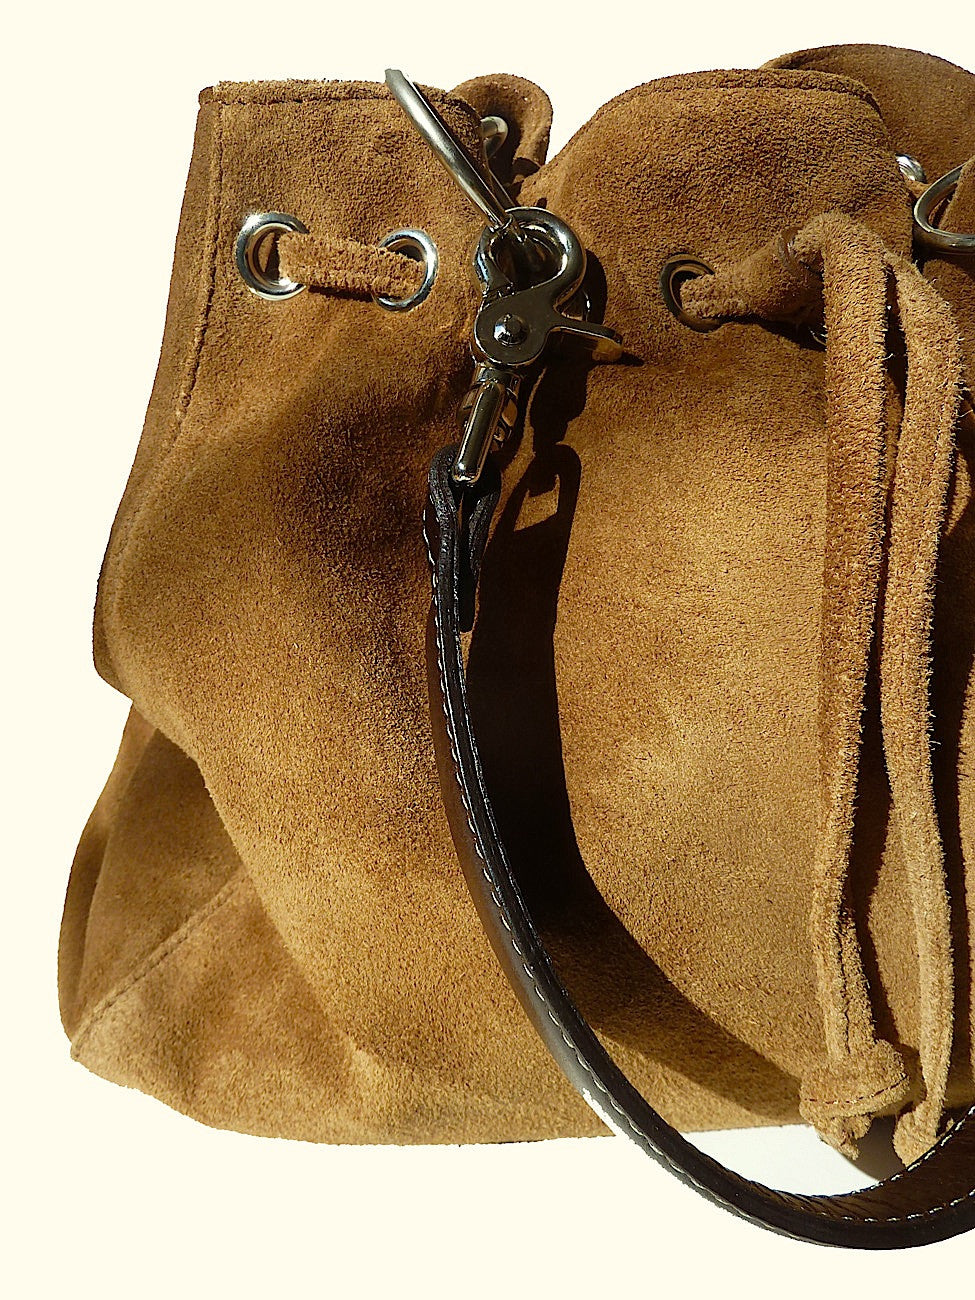 Draw String Hobo Pouch Suede